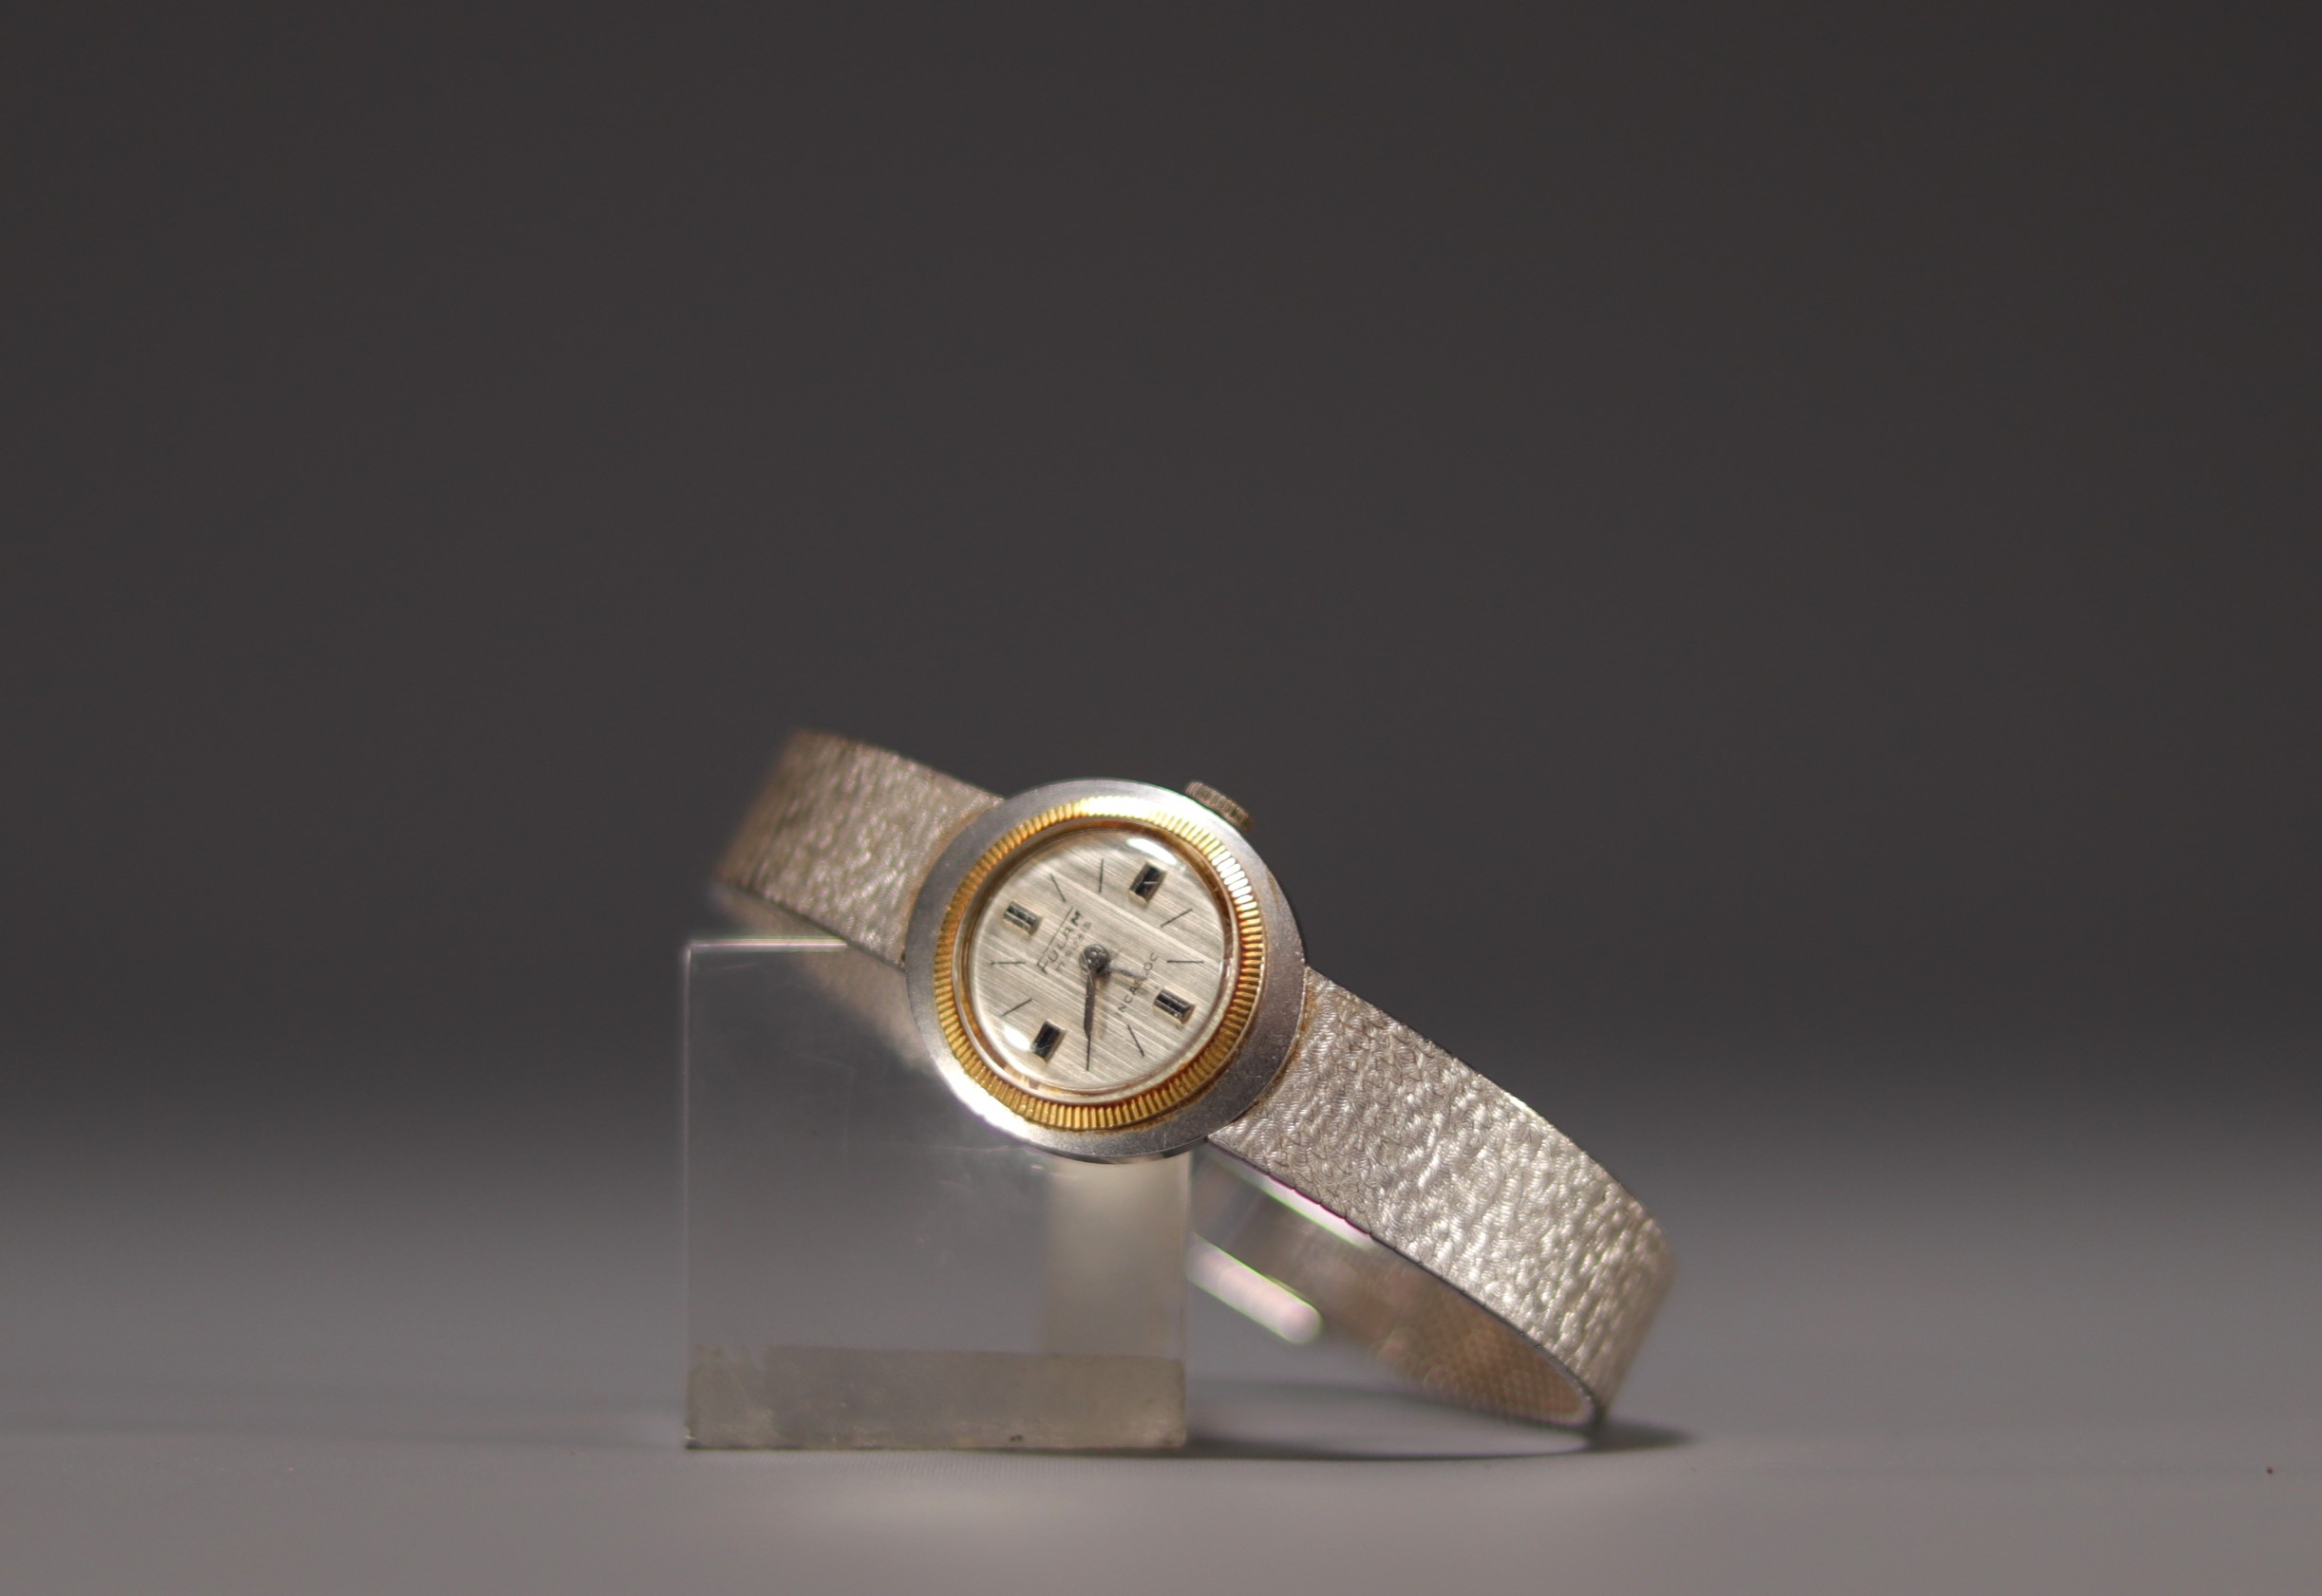 Fulam - Ladies' watch in 18K white and yellow gold weighing 38.3 grams.